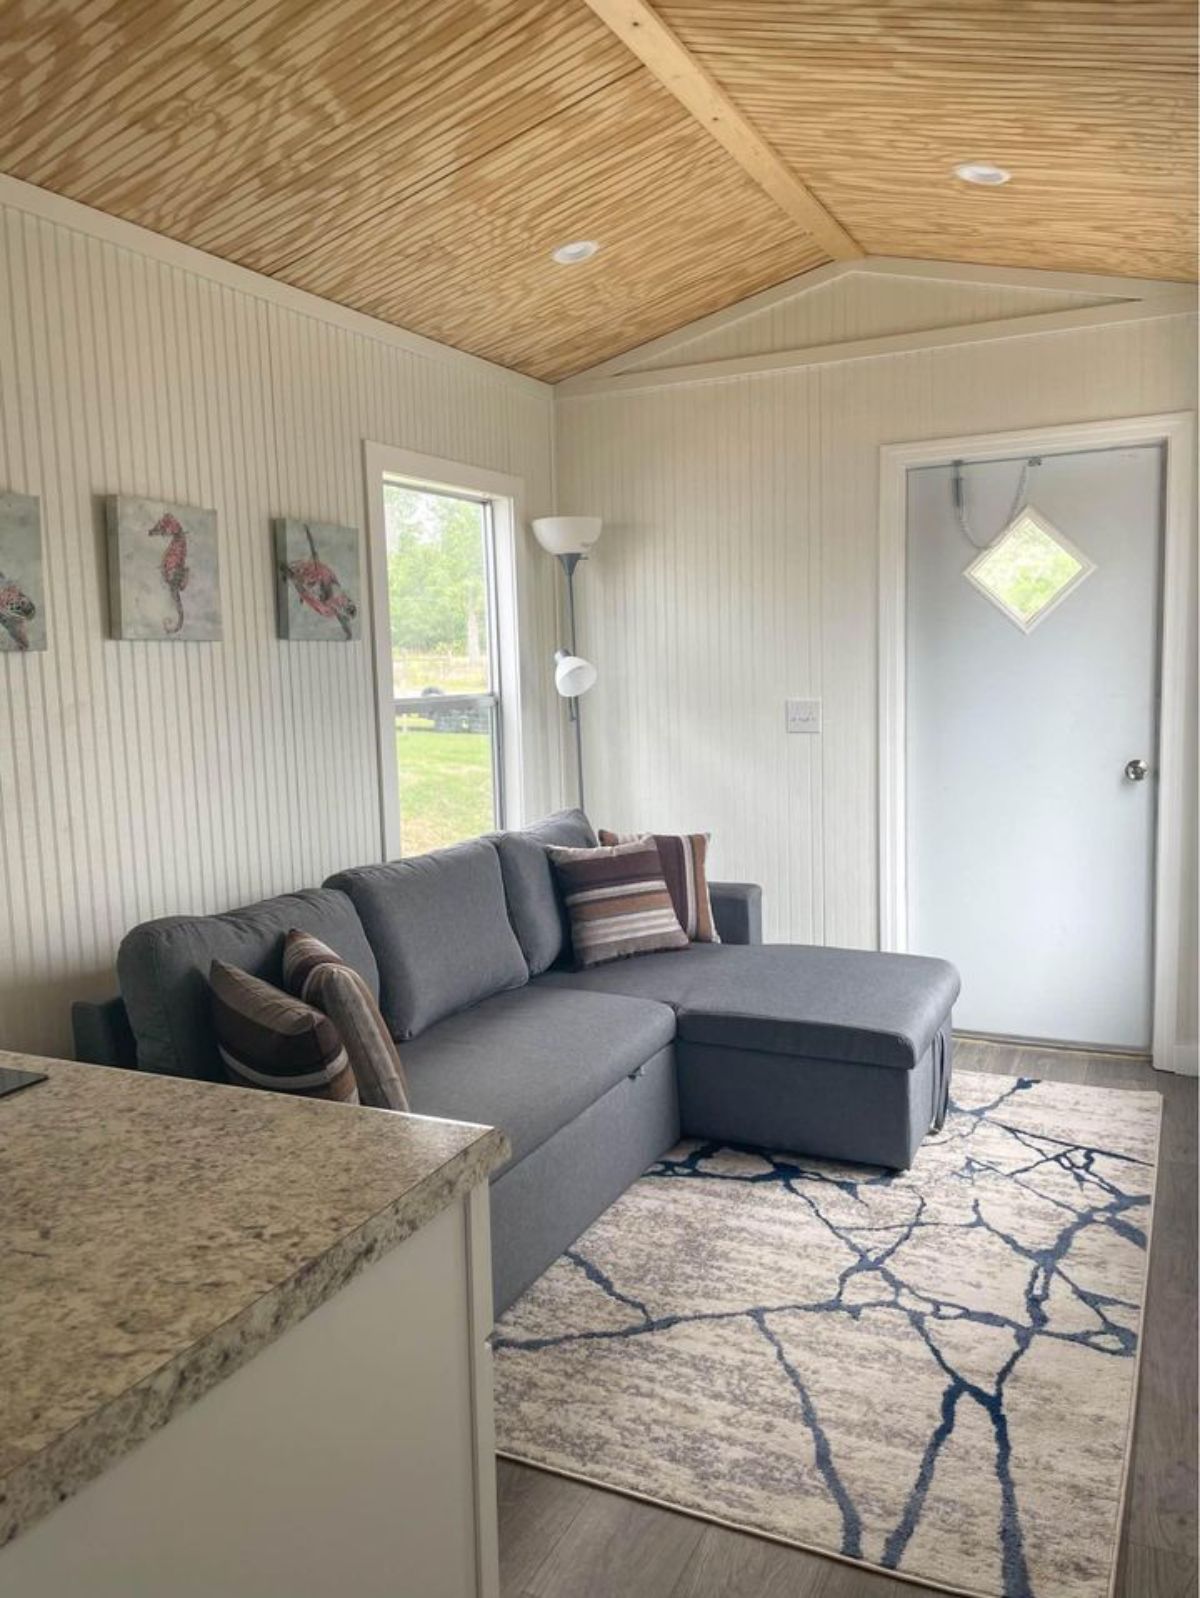 Living area of Brand New 35’ Tiny House has a soft L shaped couch